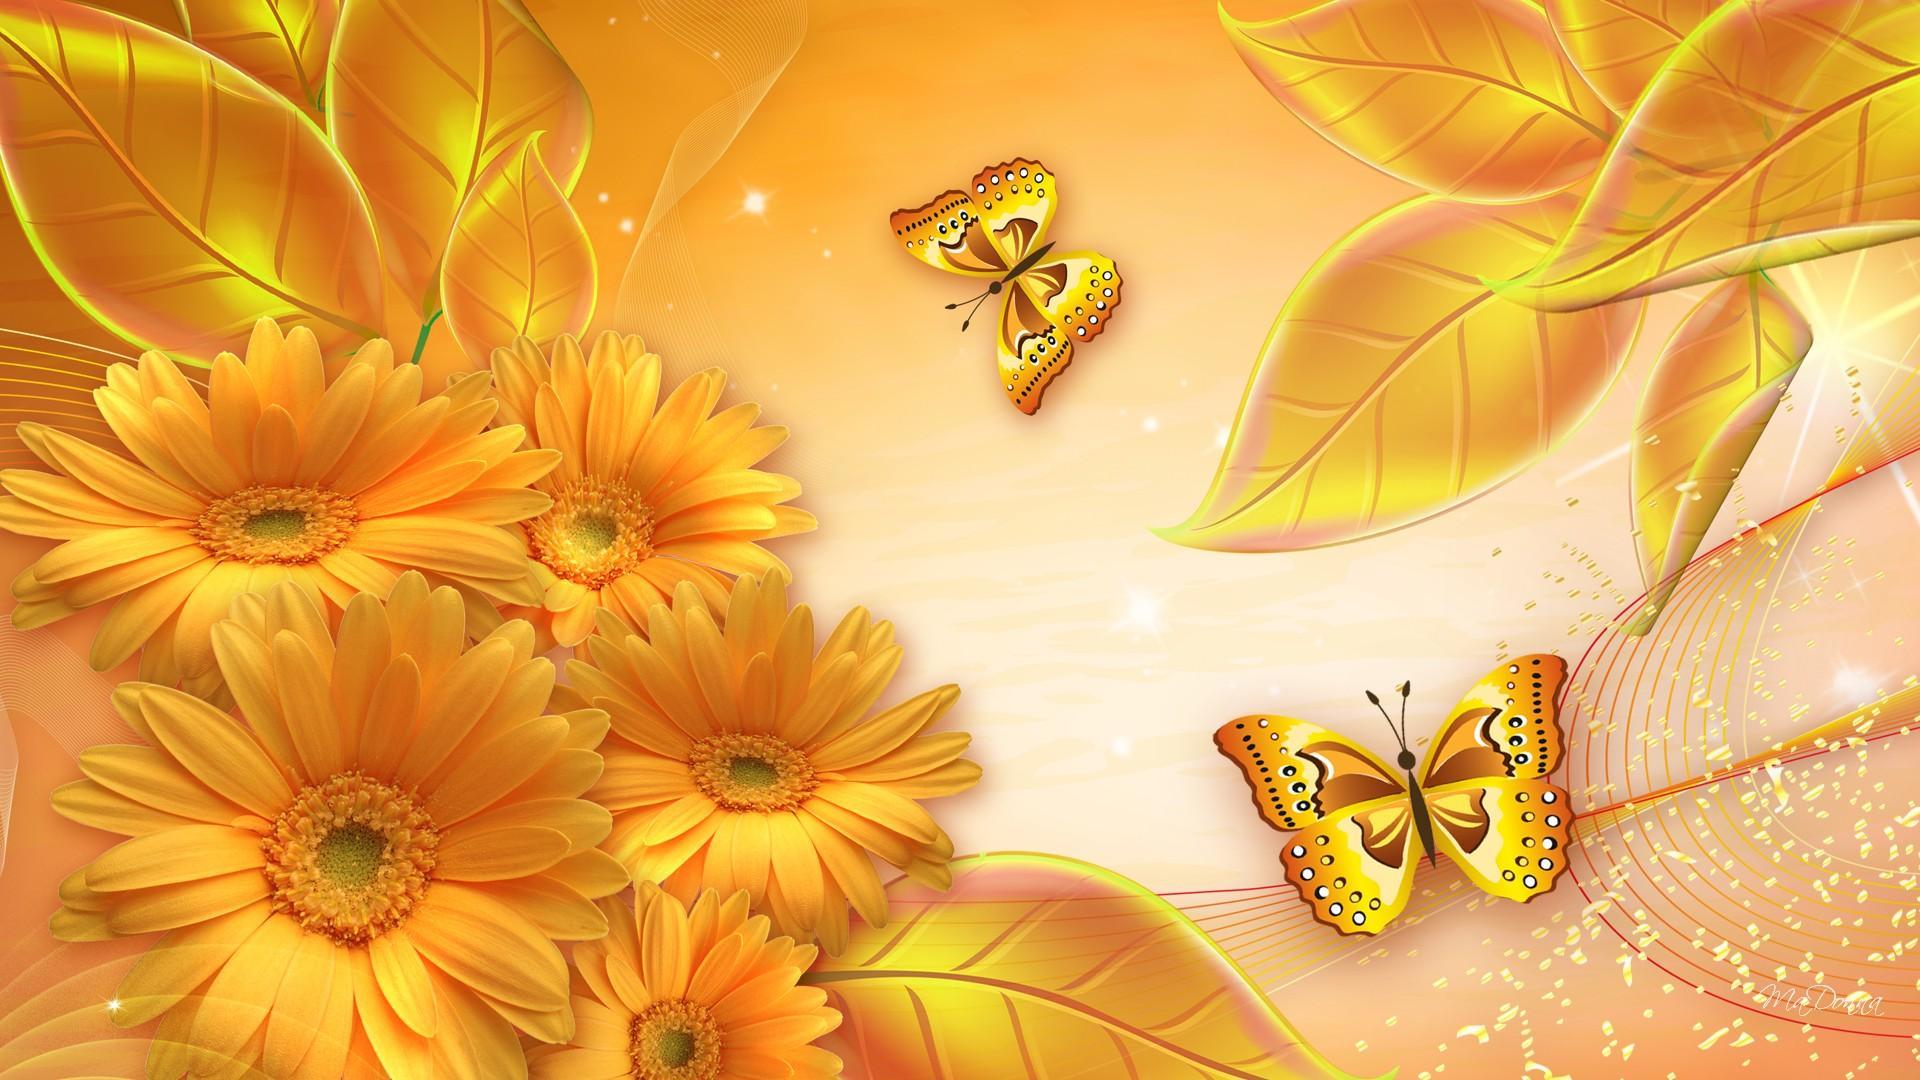 golden yellow floral background